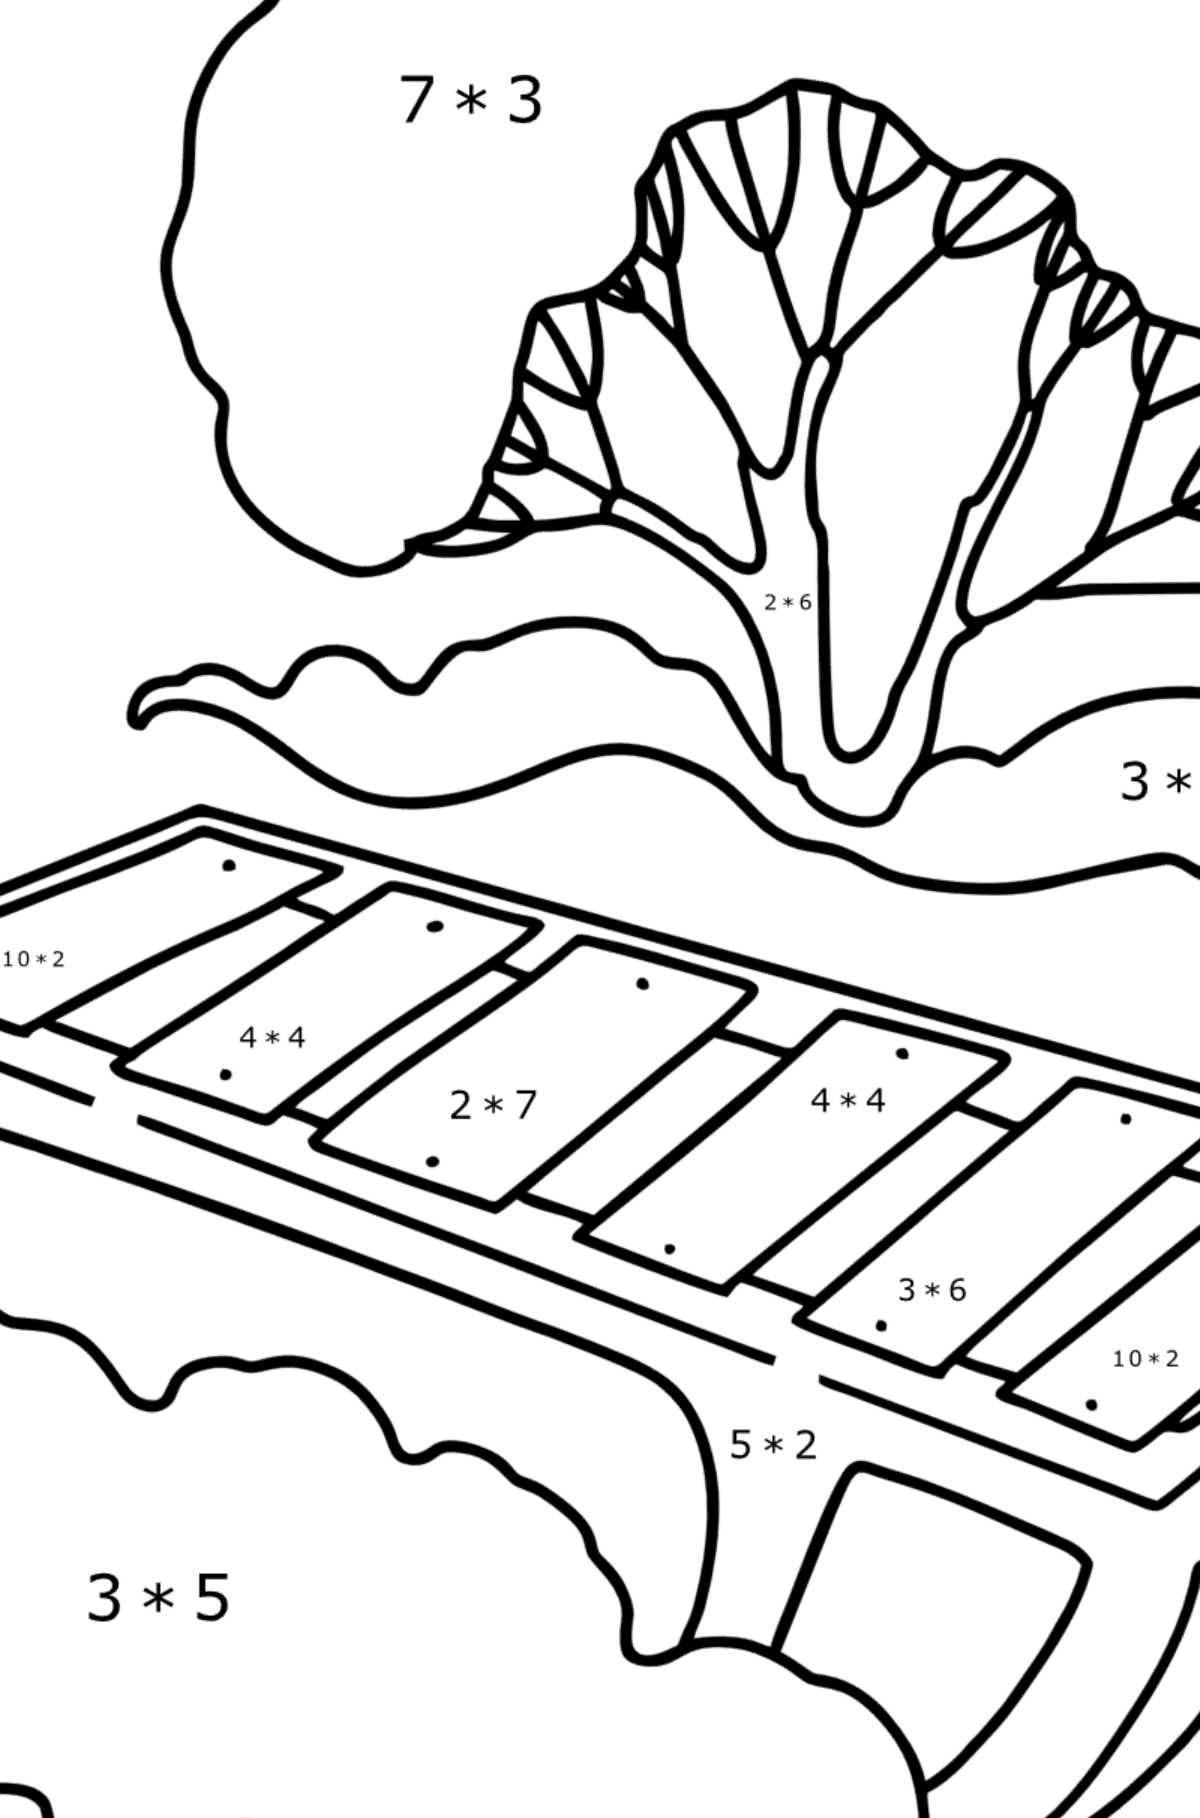 Coloring page - Sled for Kids - Math Coloring - Multiplication for Kids